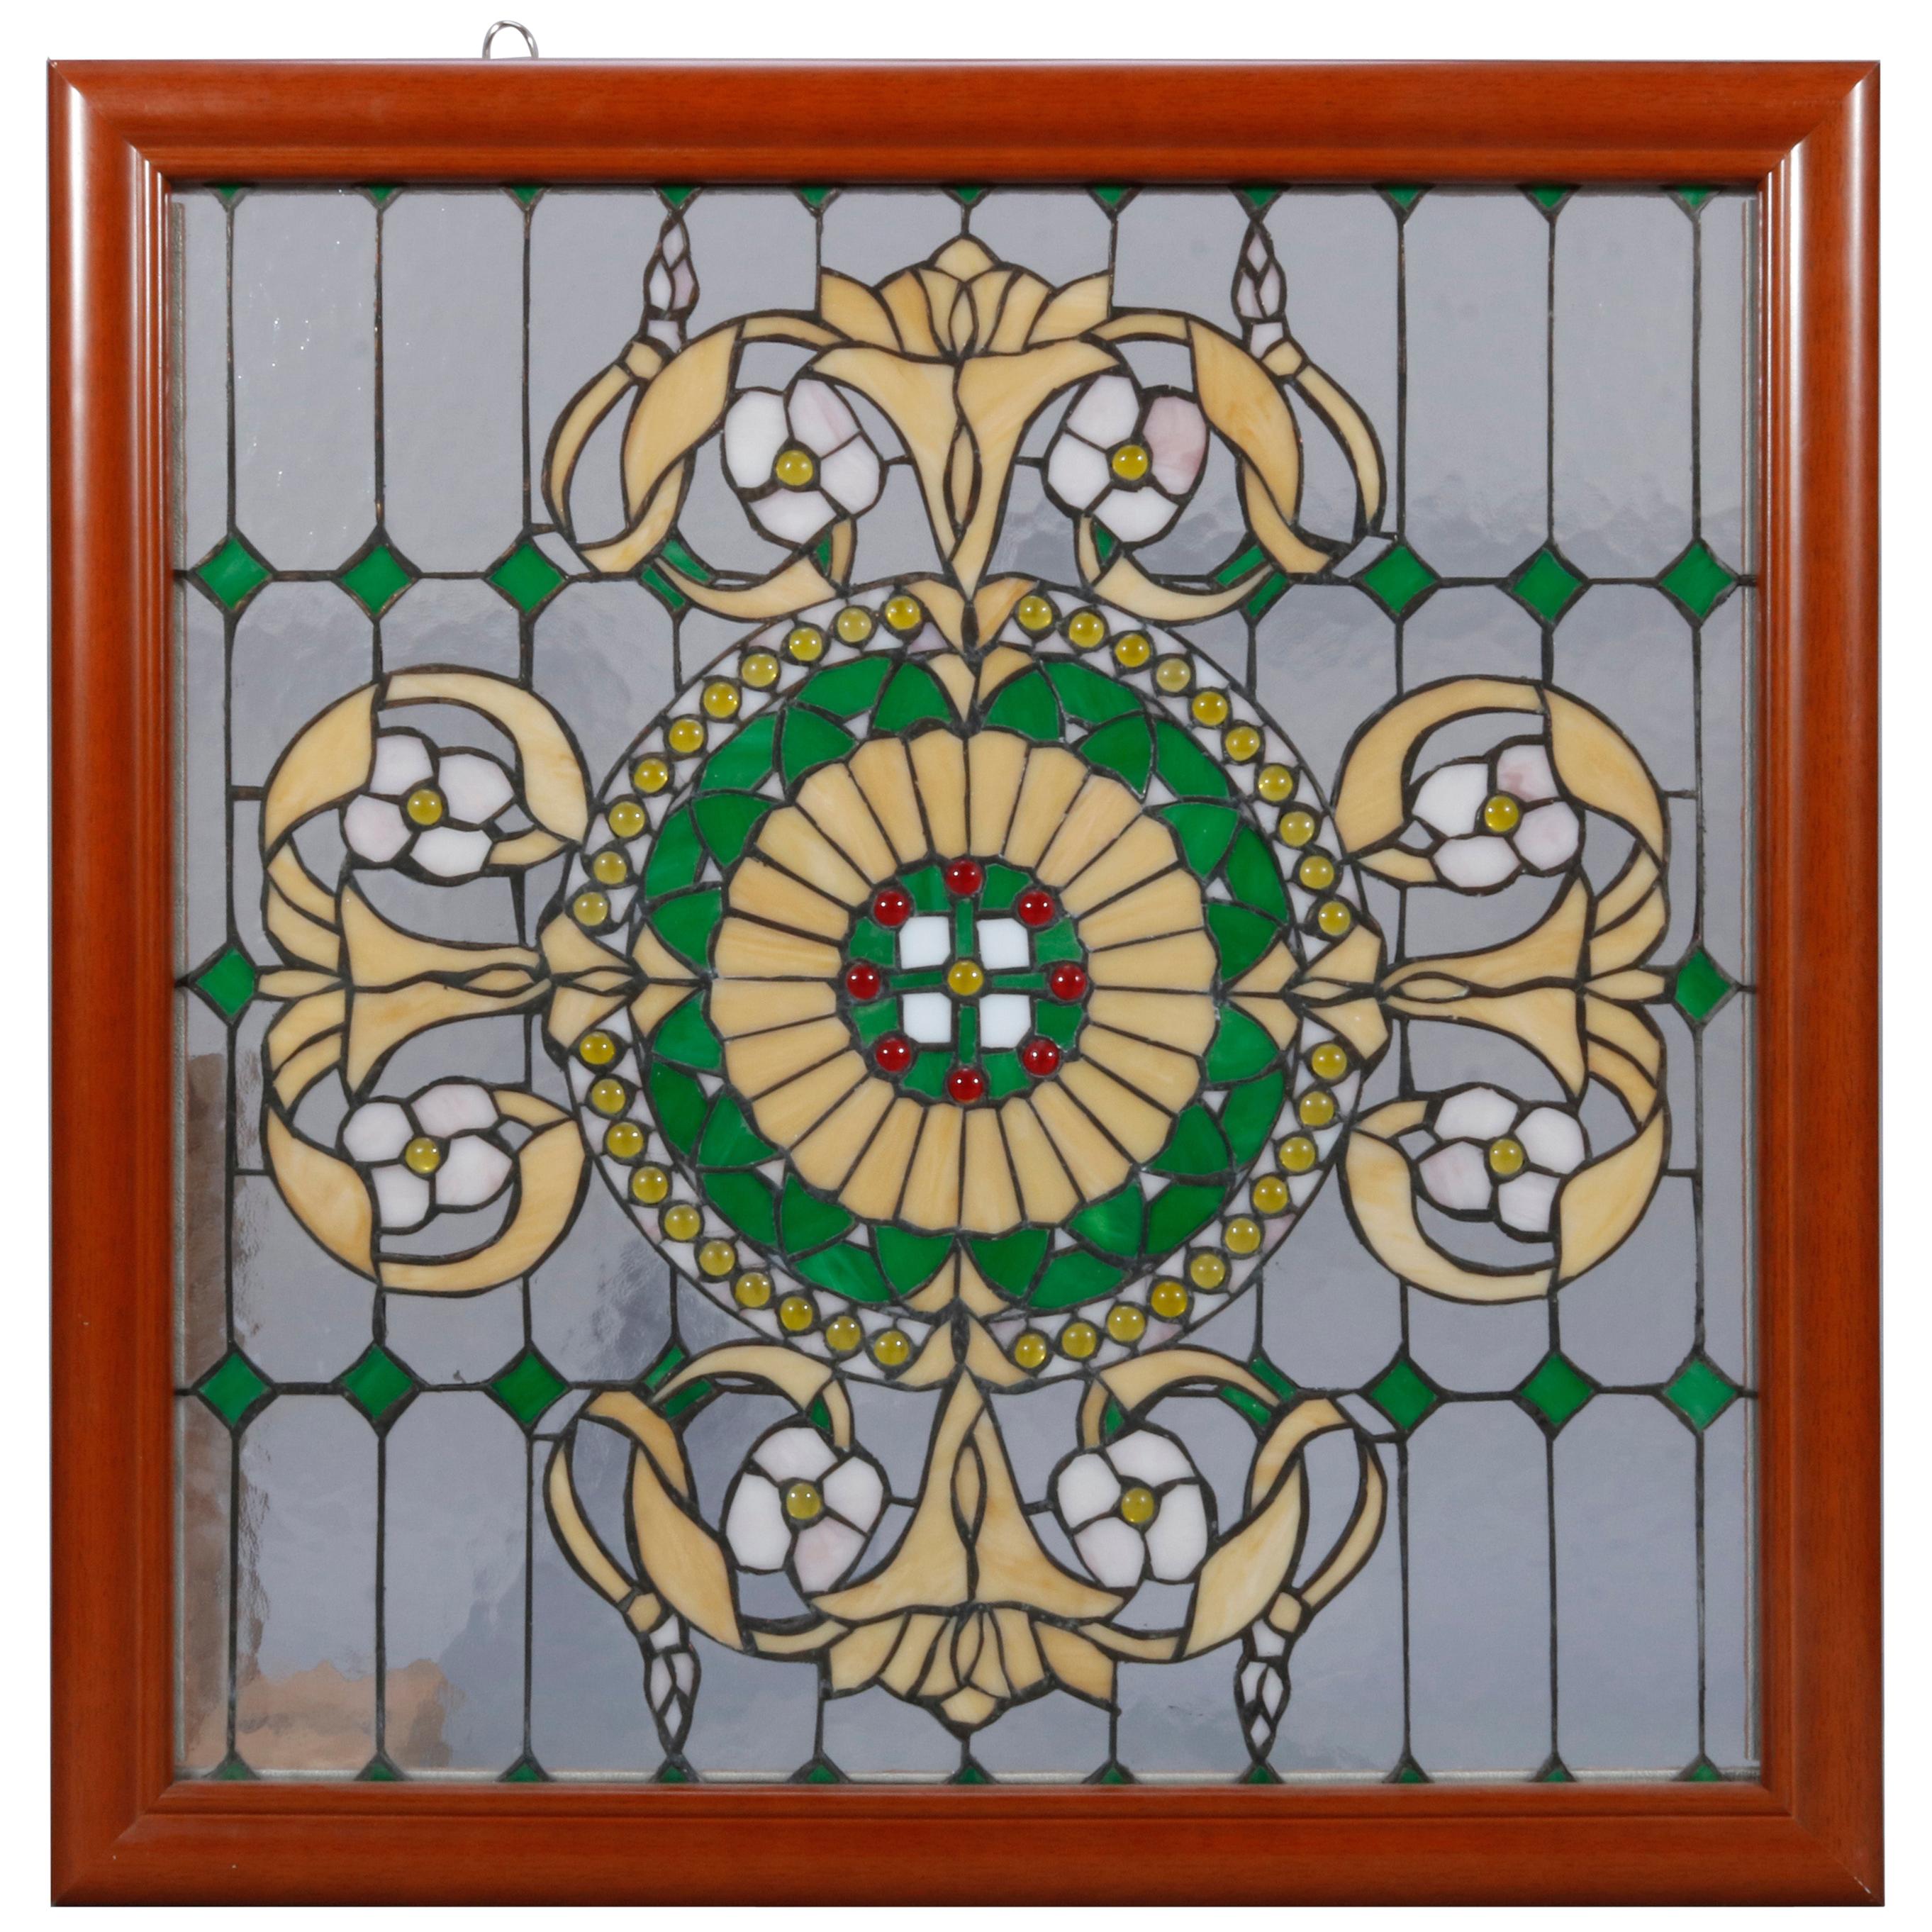 Vintage Arts & Crafts Style Jeweled Leaded Glass Window, 20th Century